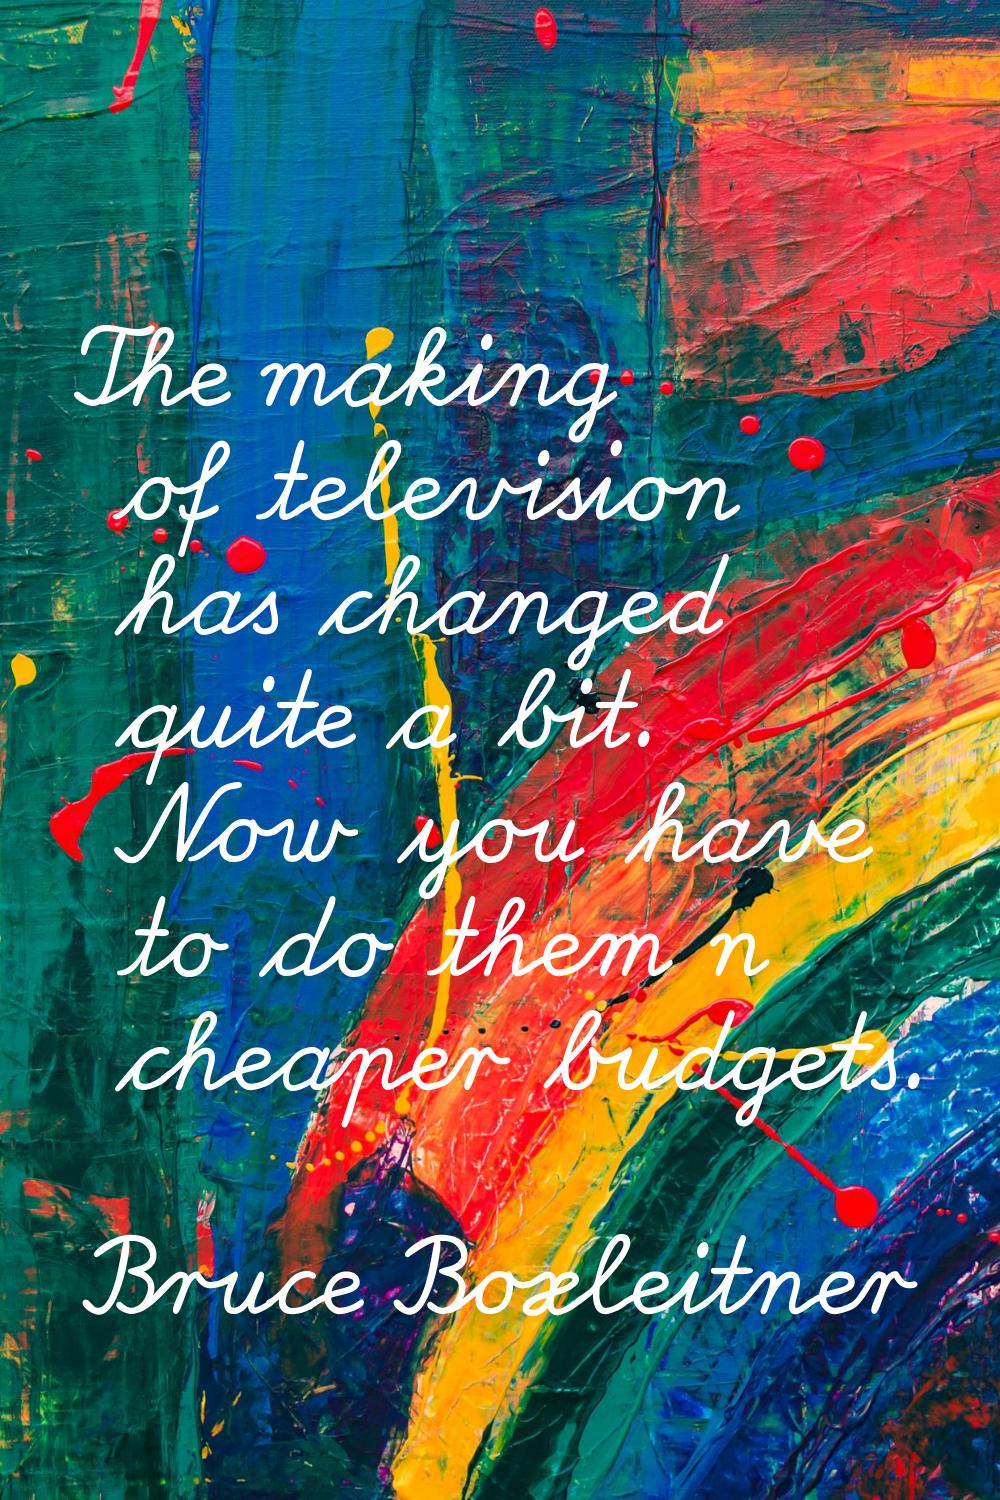 The making of television has changed quite a bit. Now you have to do them n cheaper budgets.